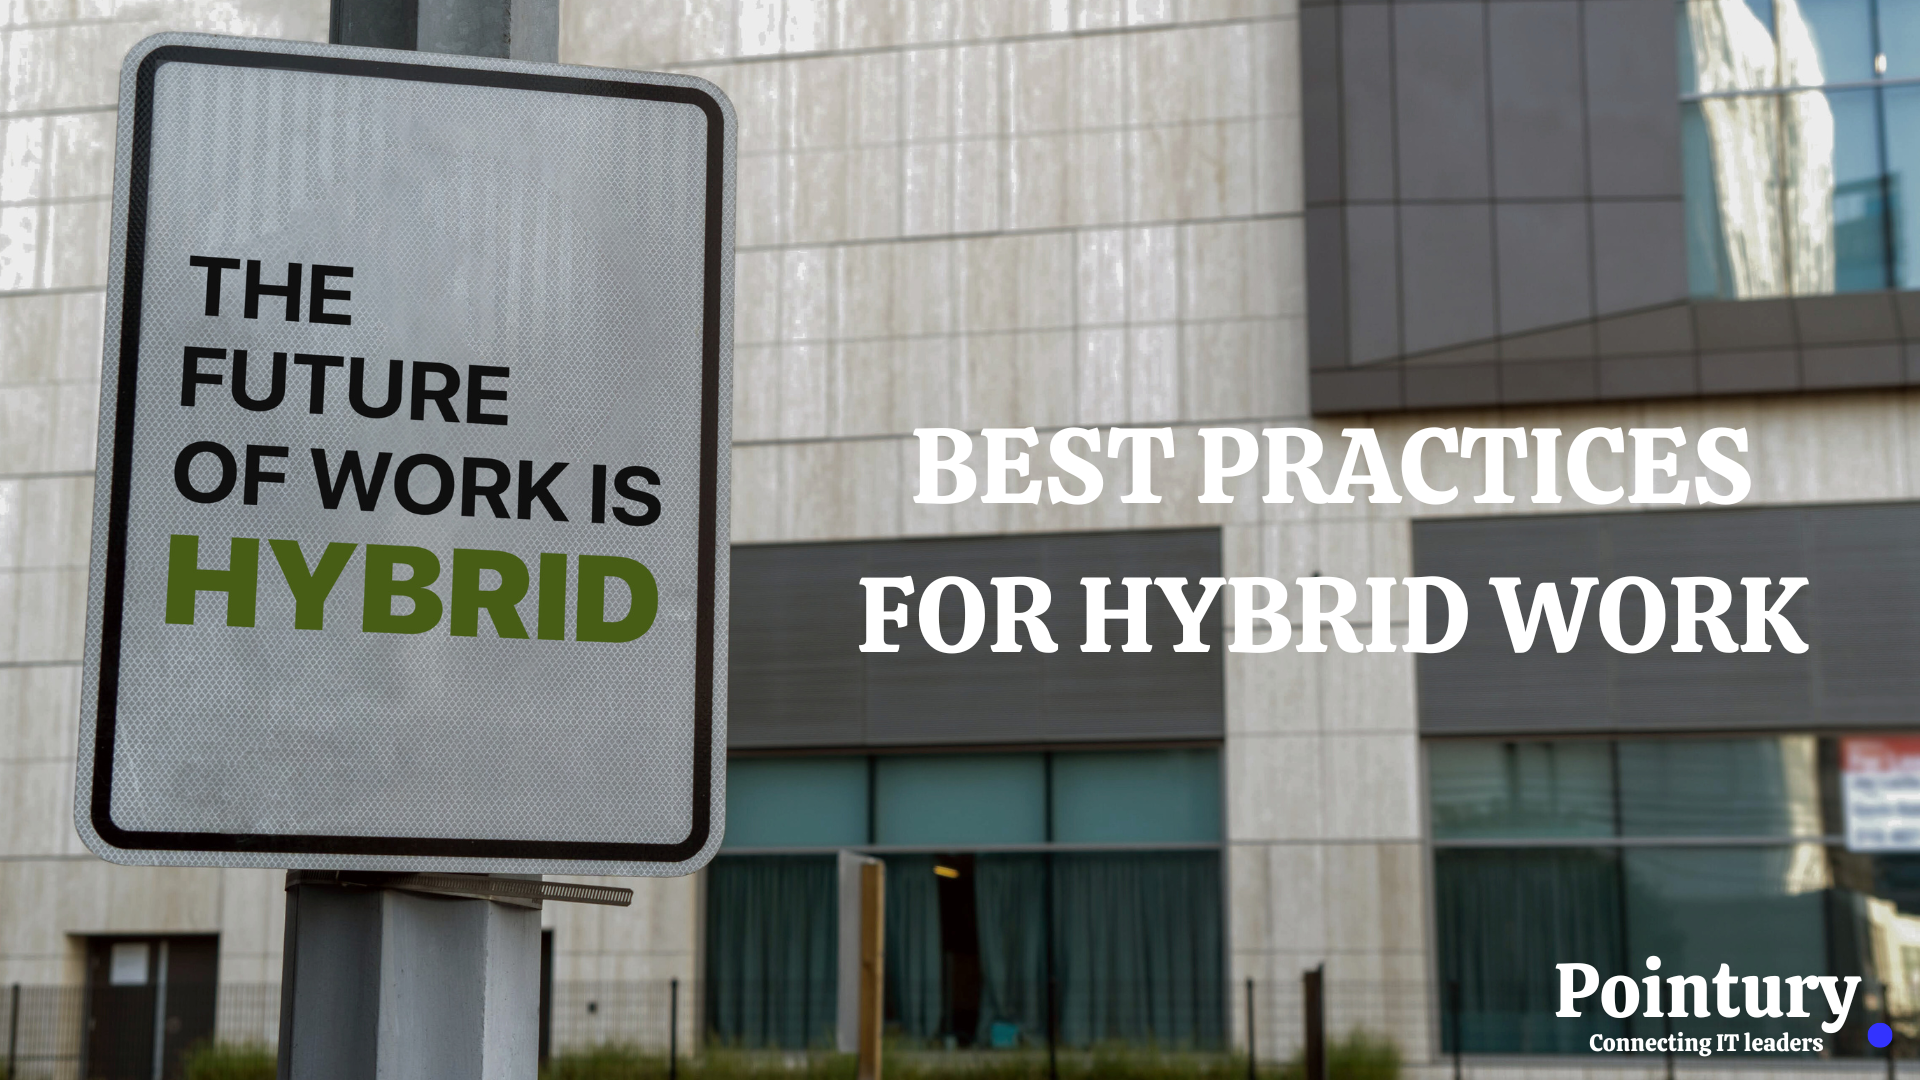 BEST PRACTICES FOR HYBRID WORK